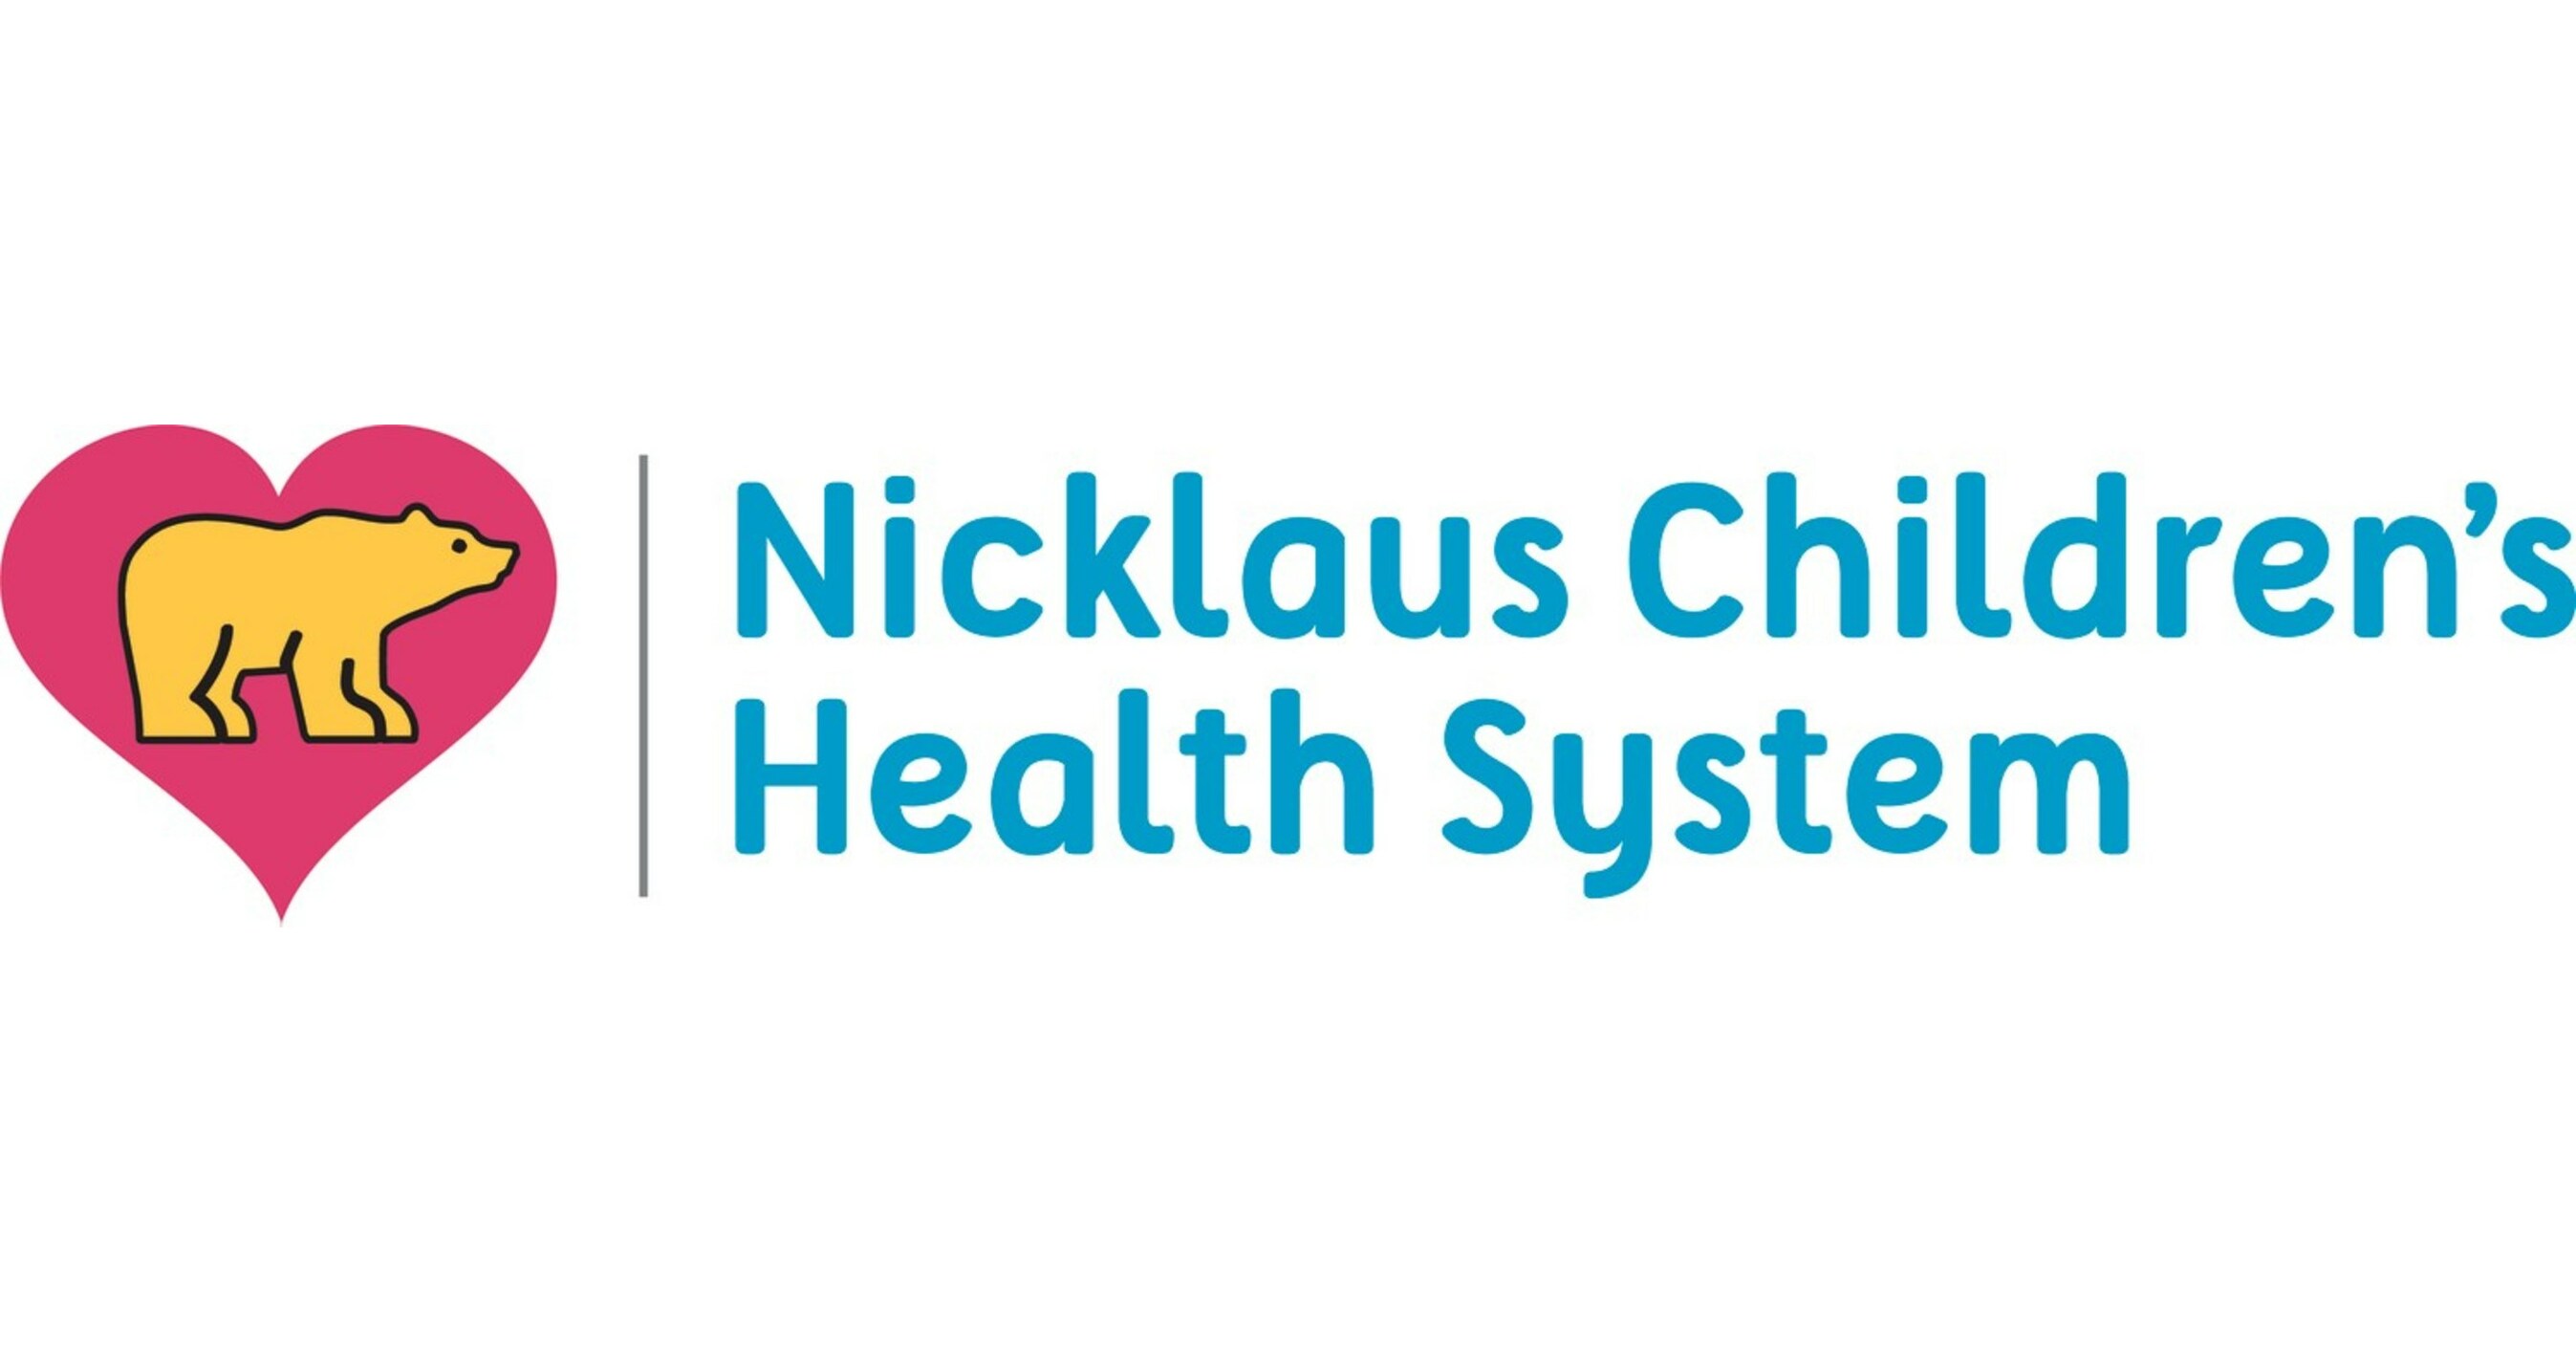 Nicklaus Children’s Health System Receives Improved Ratings from Fitch and Standard & Poor’s